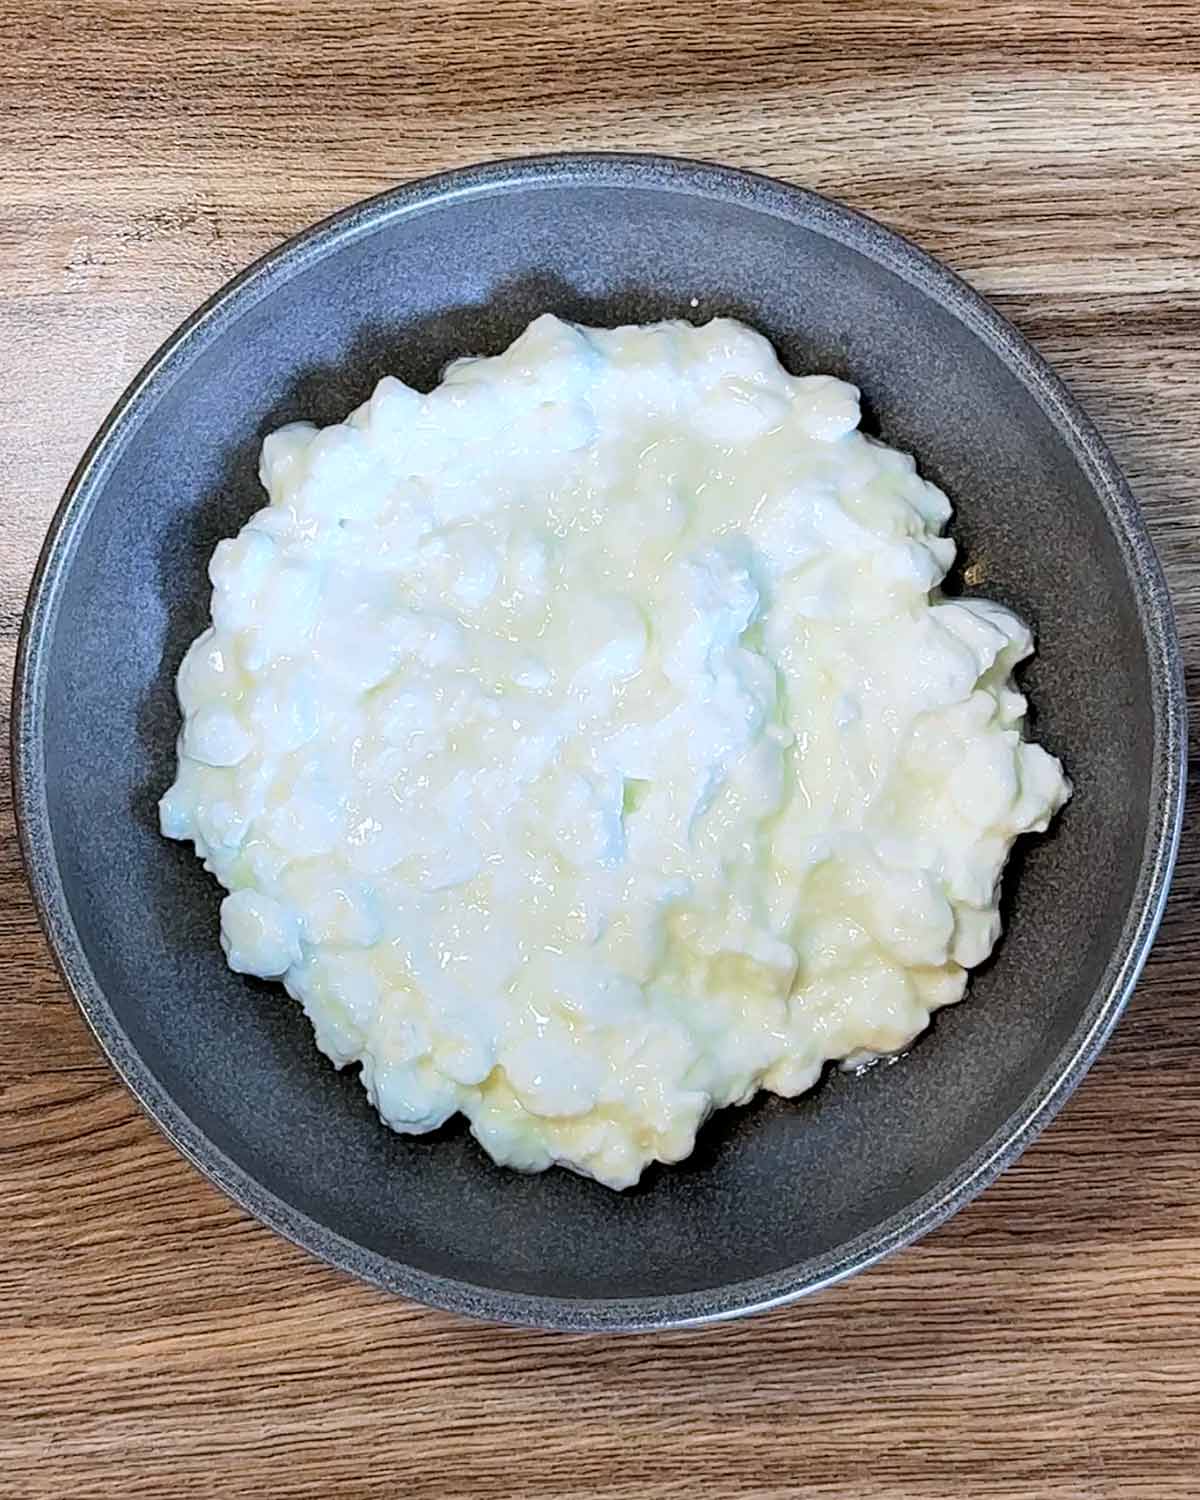 A bowl of cottage cheese.